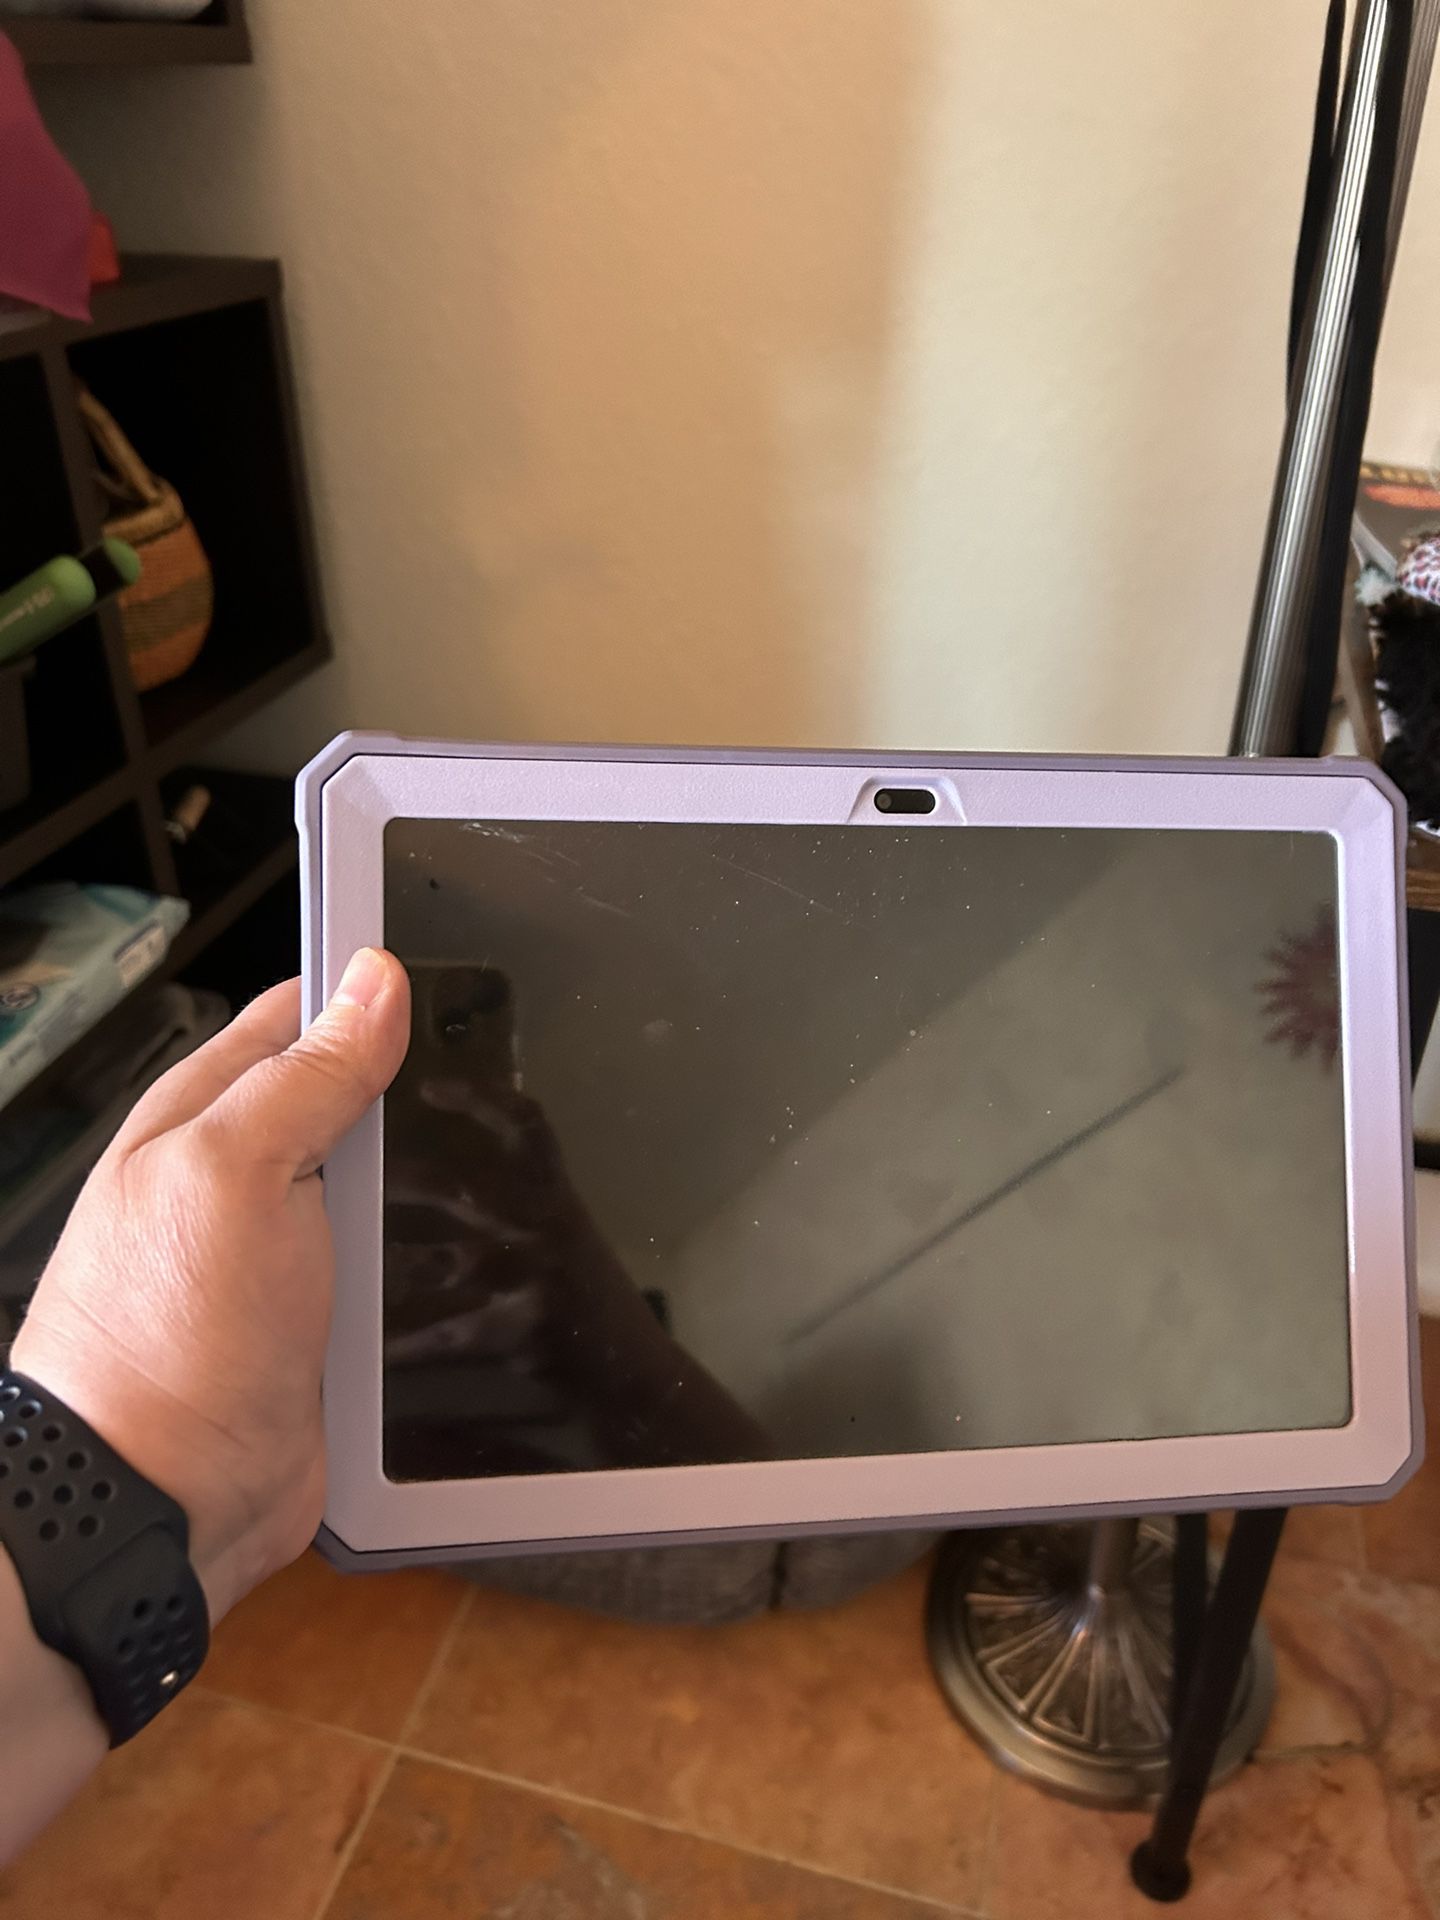 Fire Tablet 10” With Standing Case And Wireless Charger